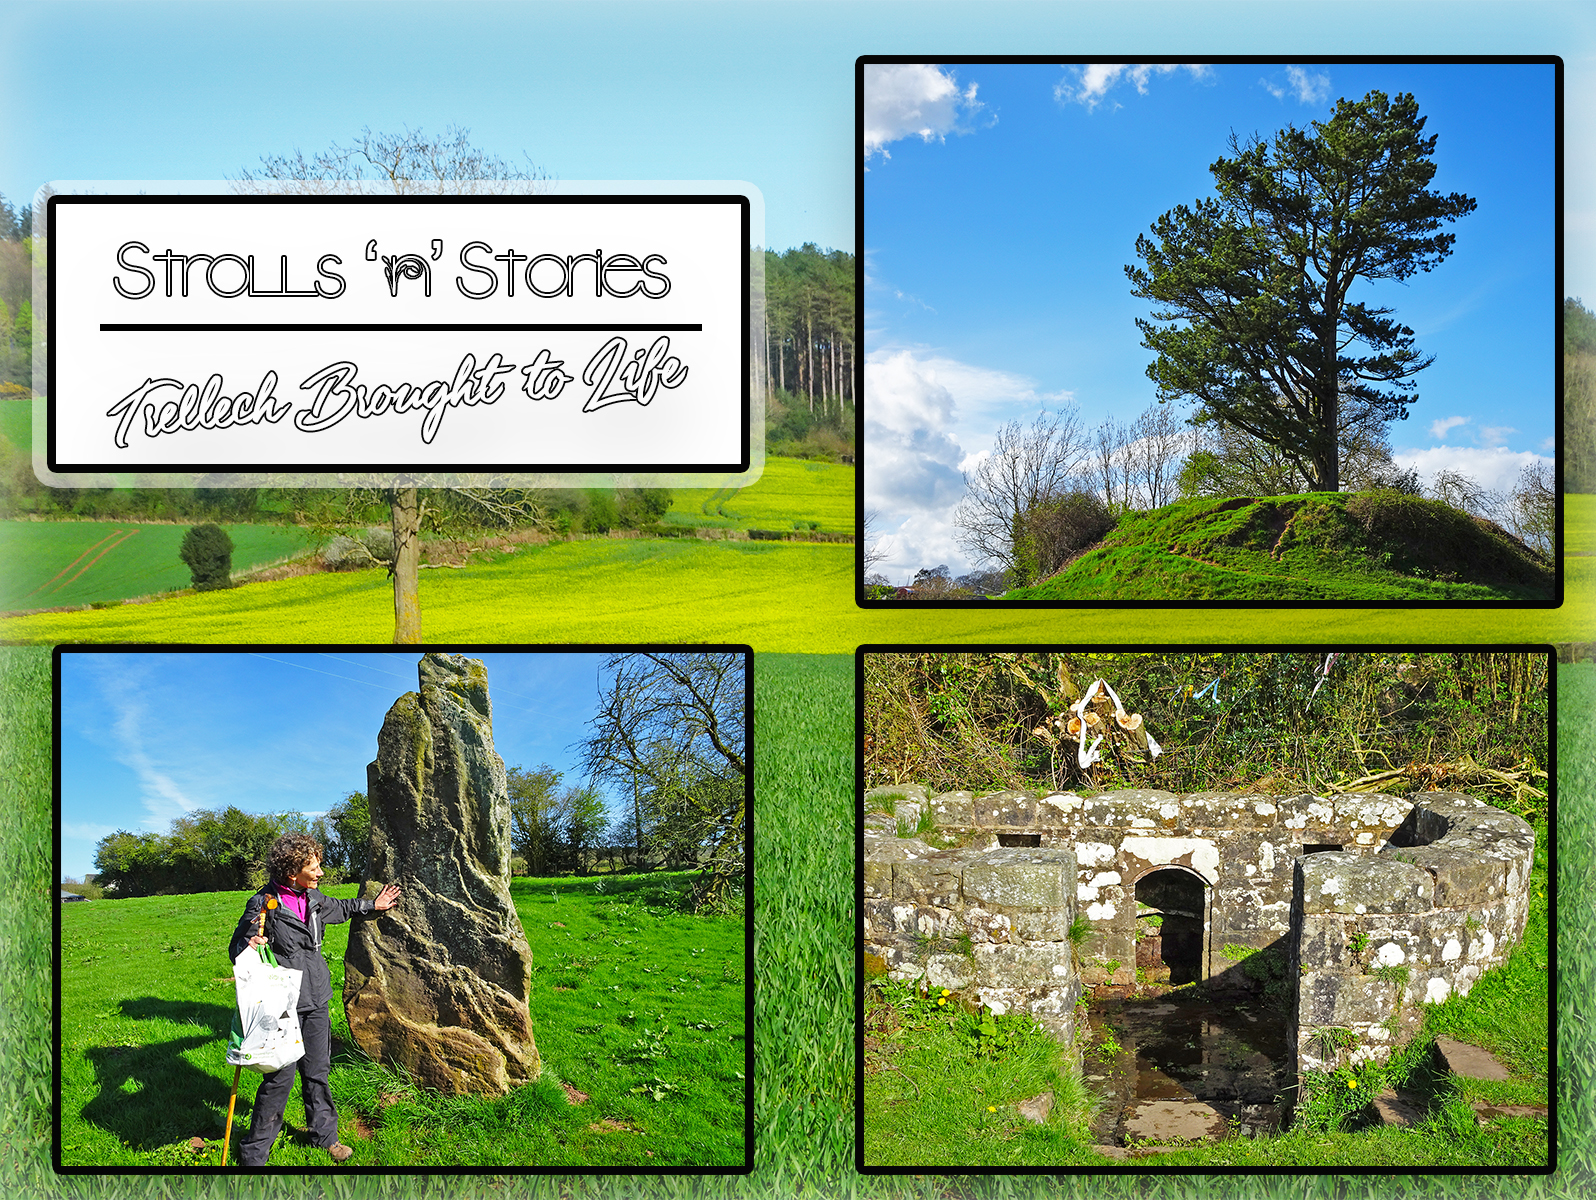 Strolls 'n' Stories Trellech Brought To Life (One Epic Road trip Blog)